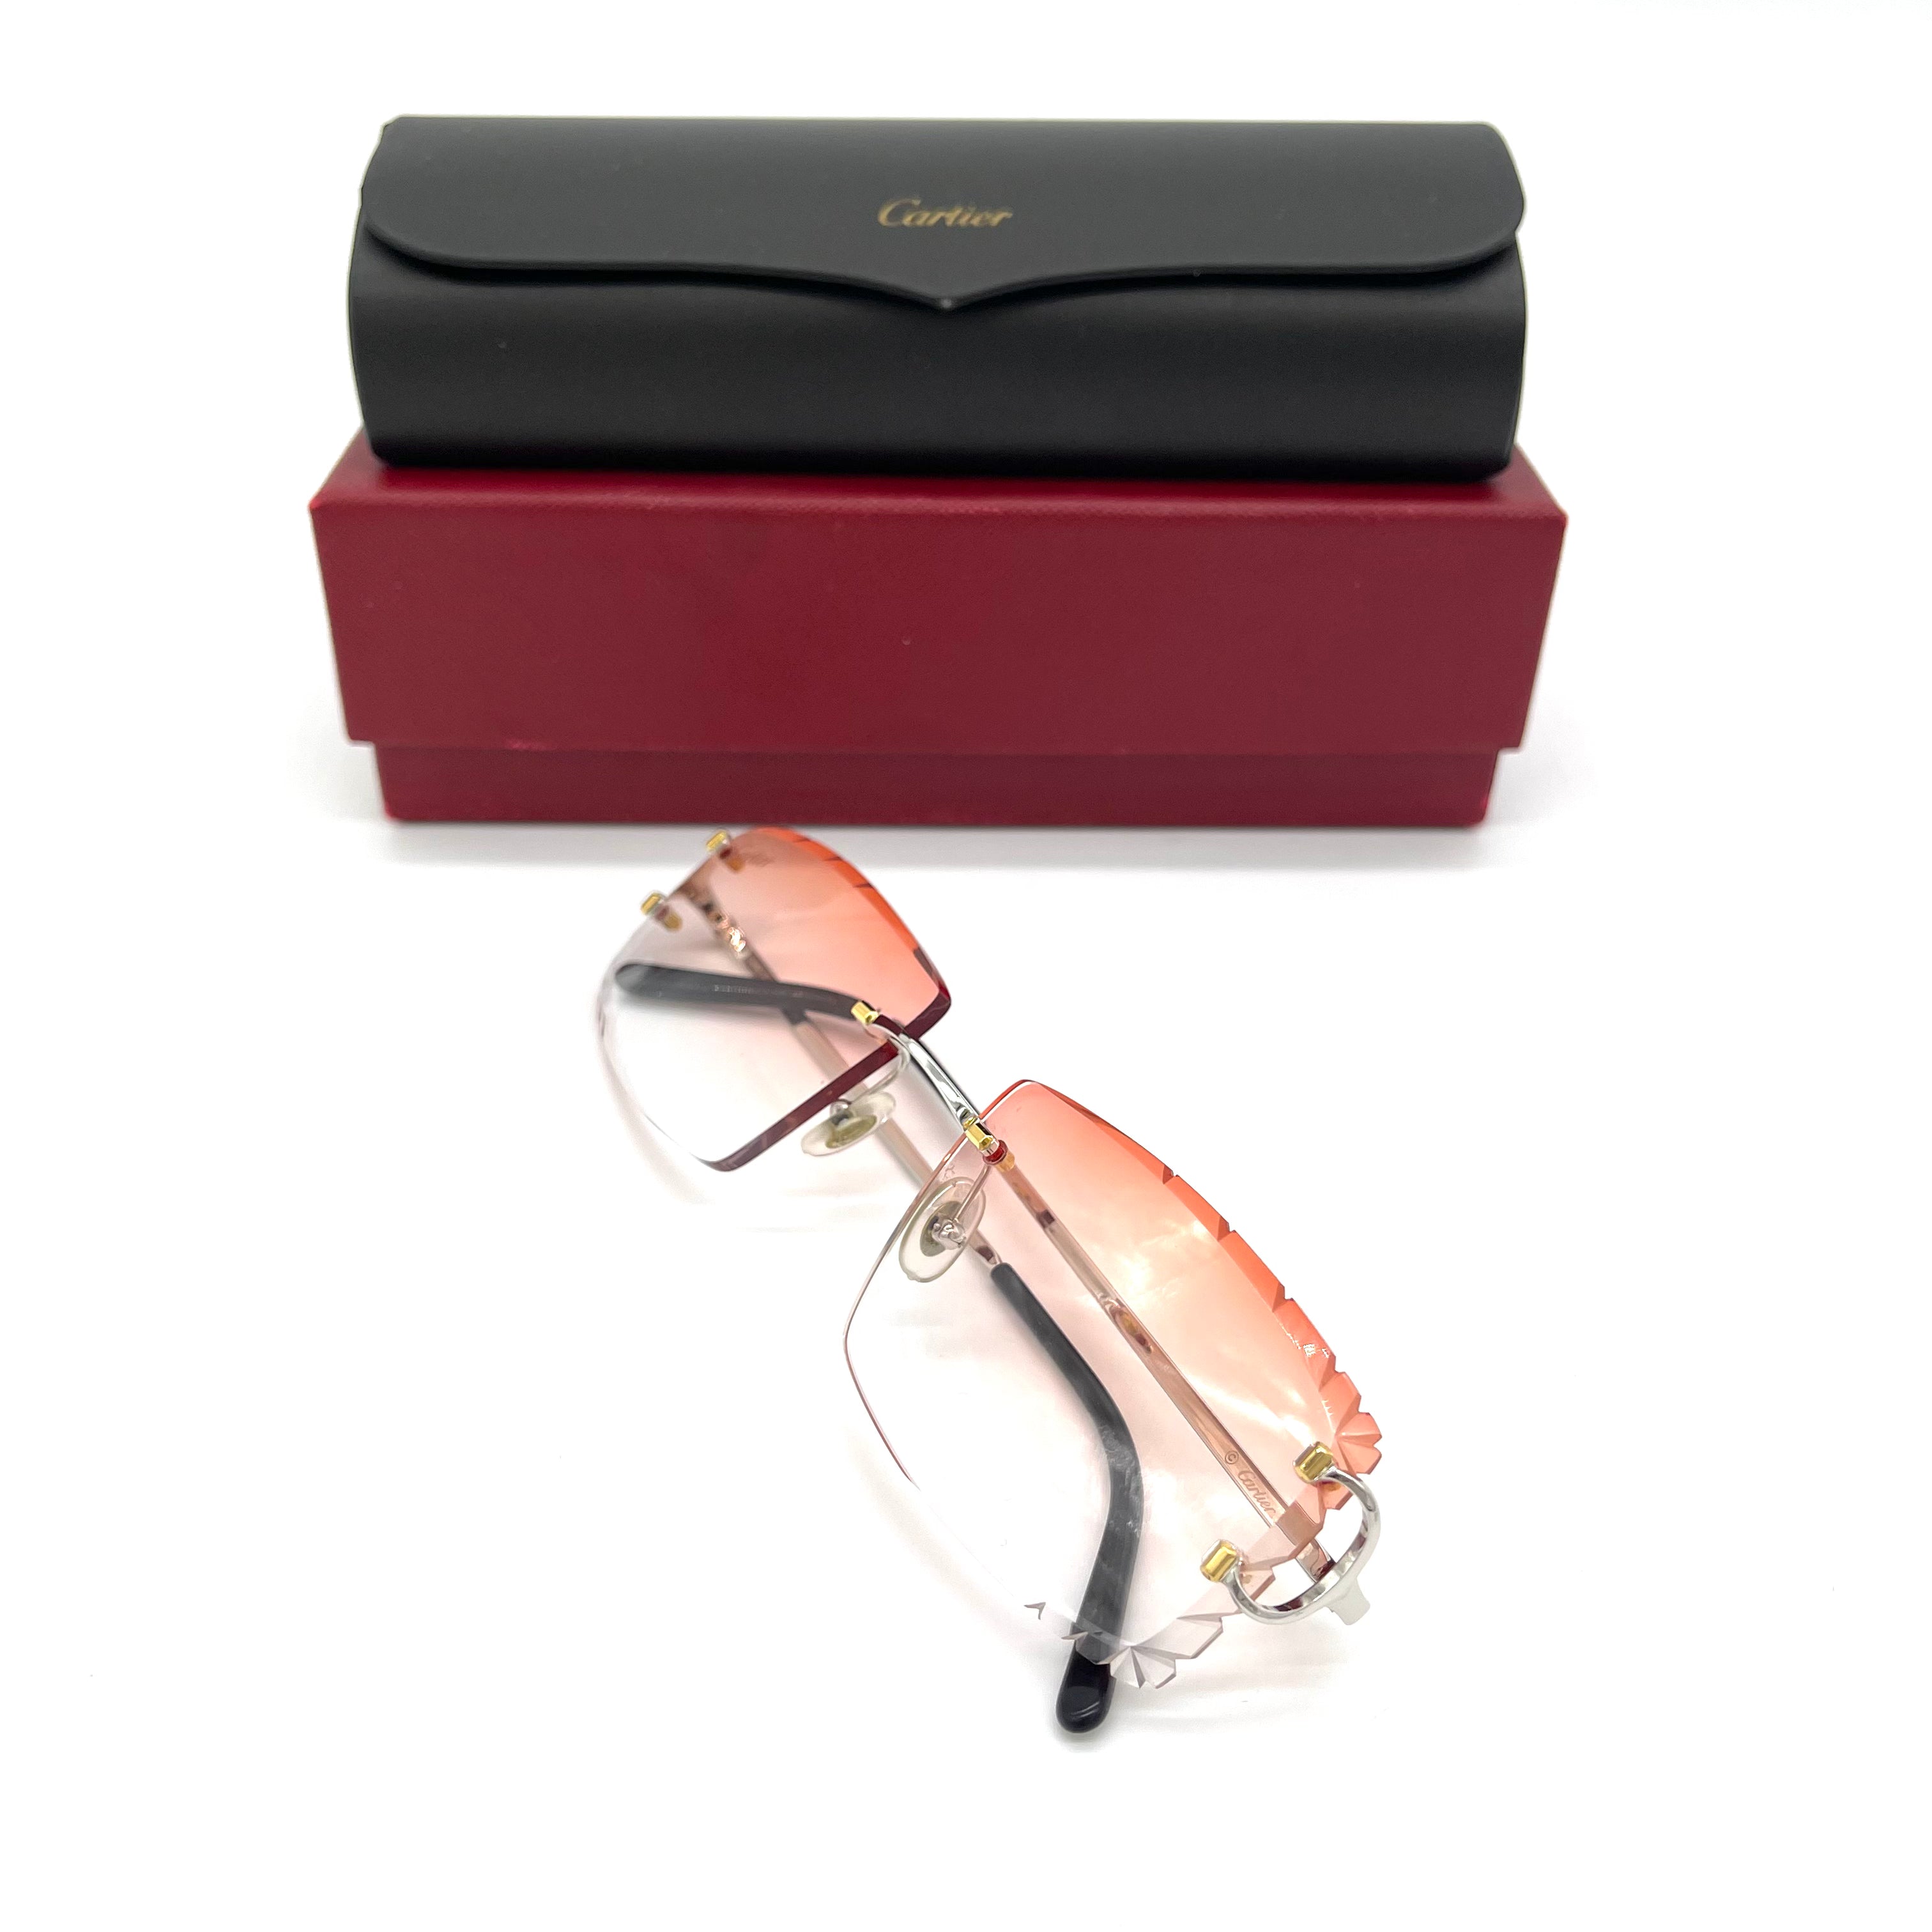 Cartier Sunglasses Limited Edition